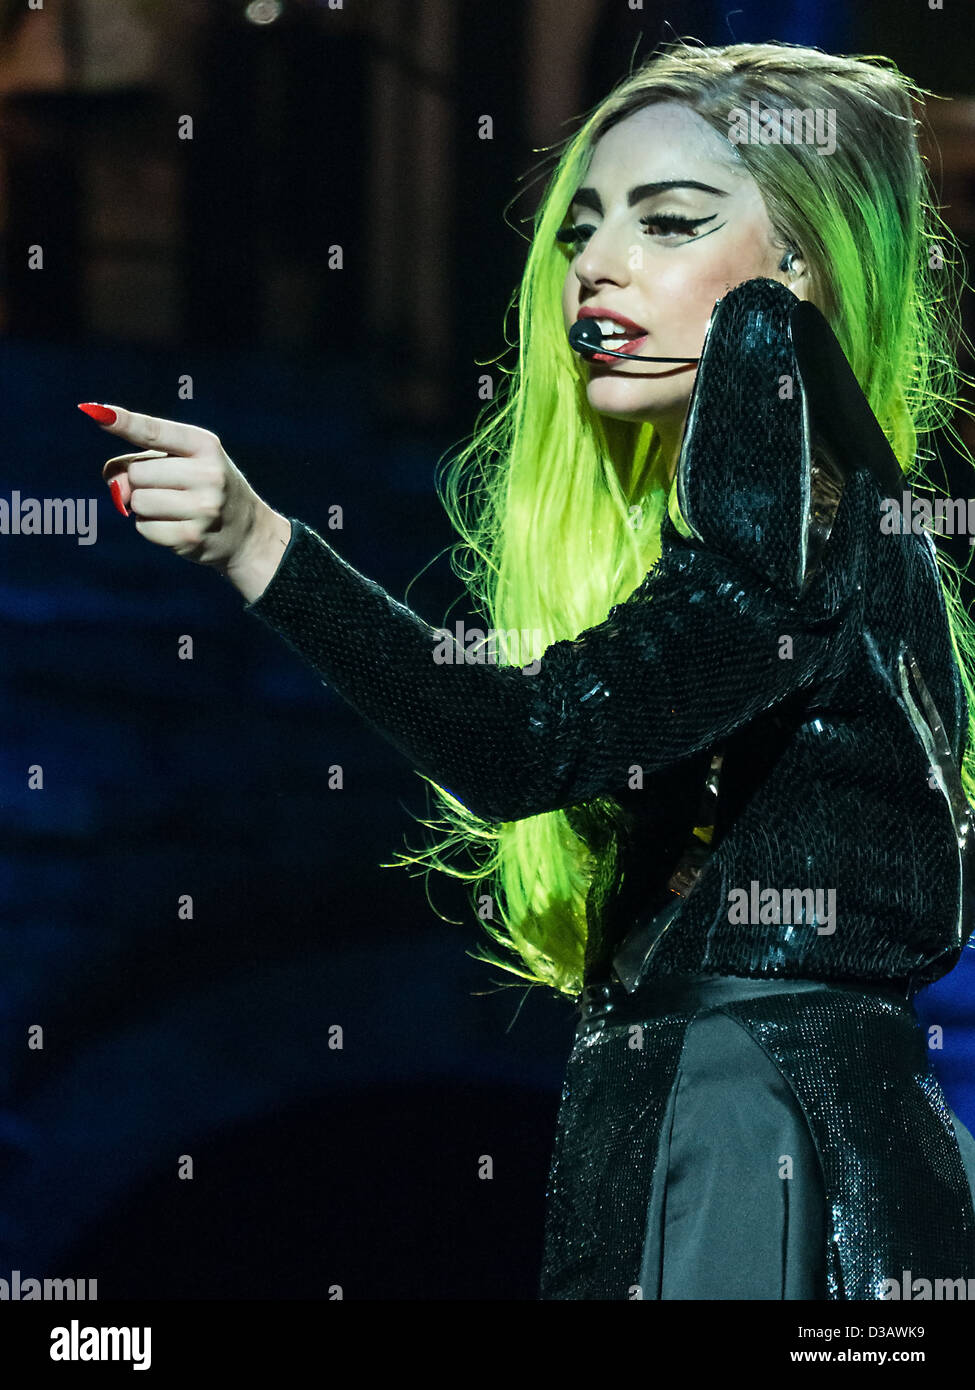 American singer Lady Gaga performs during her Born This Way Ball tour in Toronto, Ontario, Canada on Friday February 8, 2013. Stock Photo